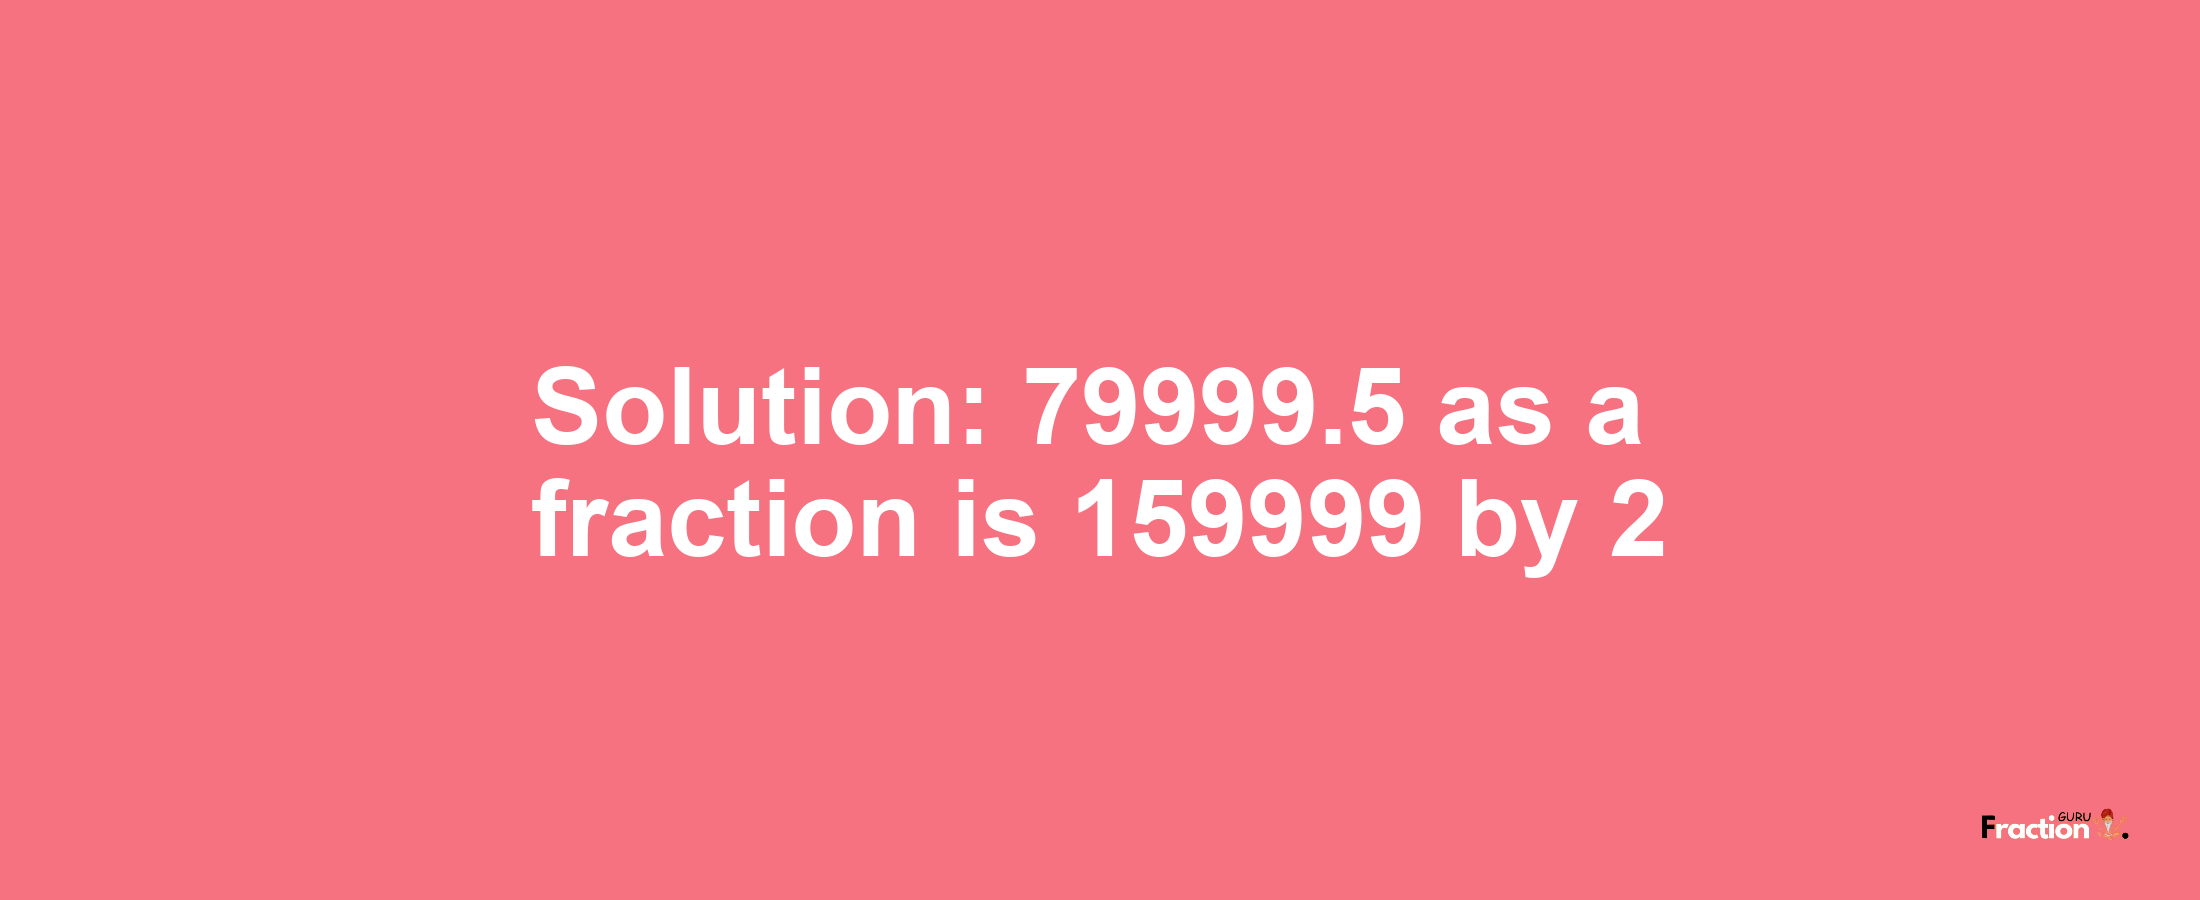 Solution:79999.5 as a fraction is 159999/2